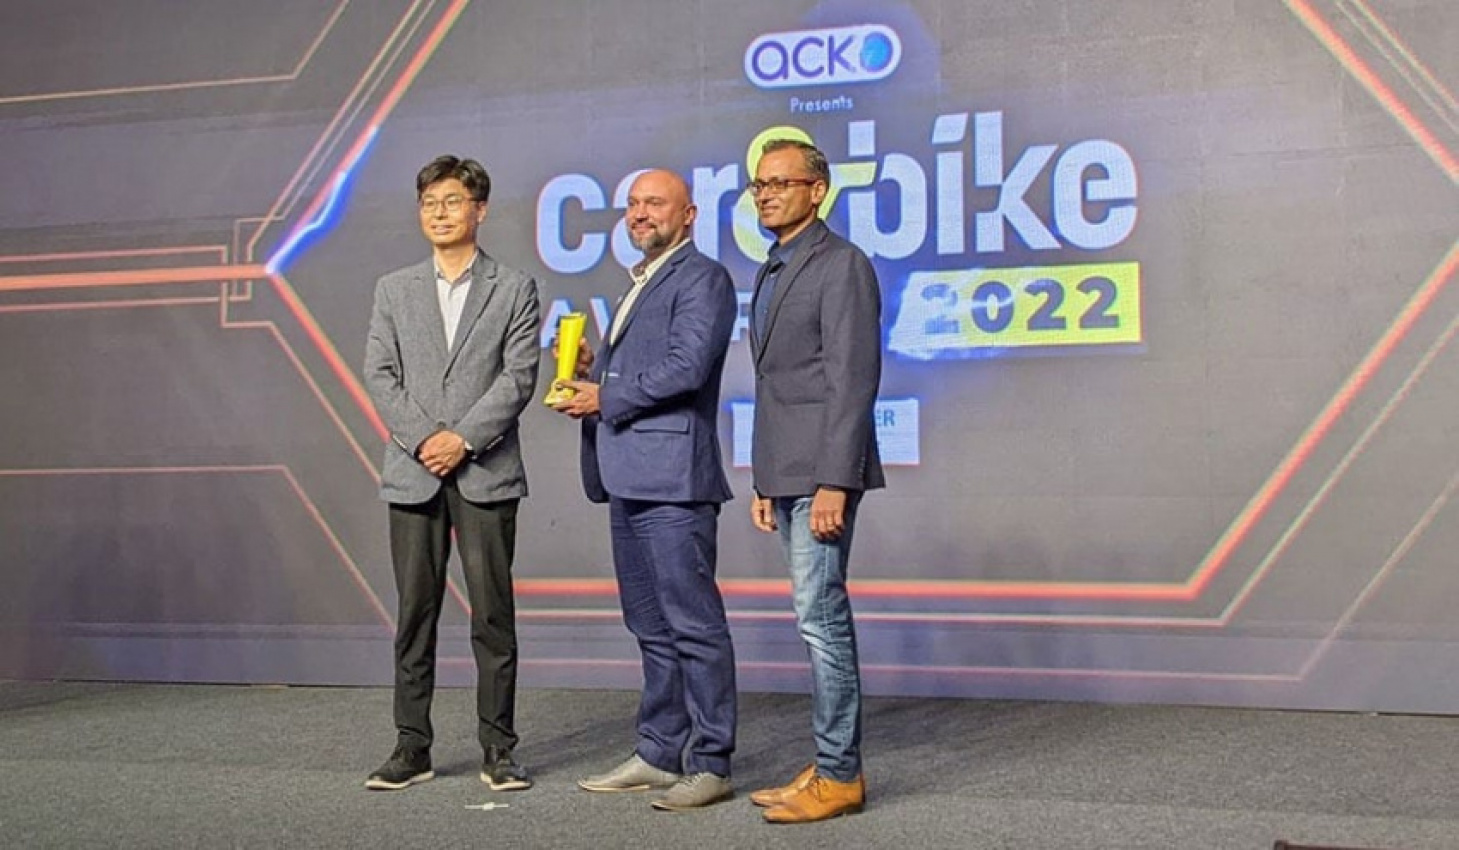 autos, cars, 2022 adventure motorcycle of the year, 2022 carandbike awards adventure motorcycle of the year, adventure motorcycle of the year, auto news, carandbike, carandbike awards, carandbike awards 2022, carandbike awards adventure motorcycle of the year, cnb awards, cnb awards 2022, hero, hero motocorp, hero xpulse 200 4 valve, news, carandbike awards 2022: adventure motorcycle of the year - hero xpulse 200 4 valve